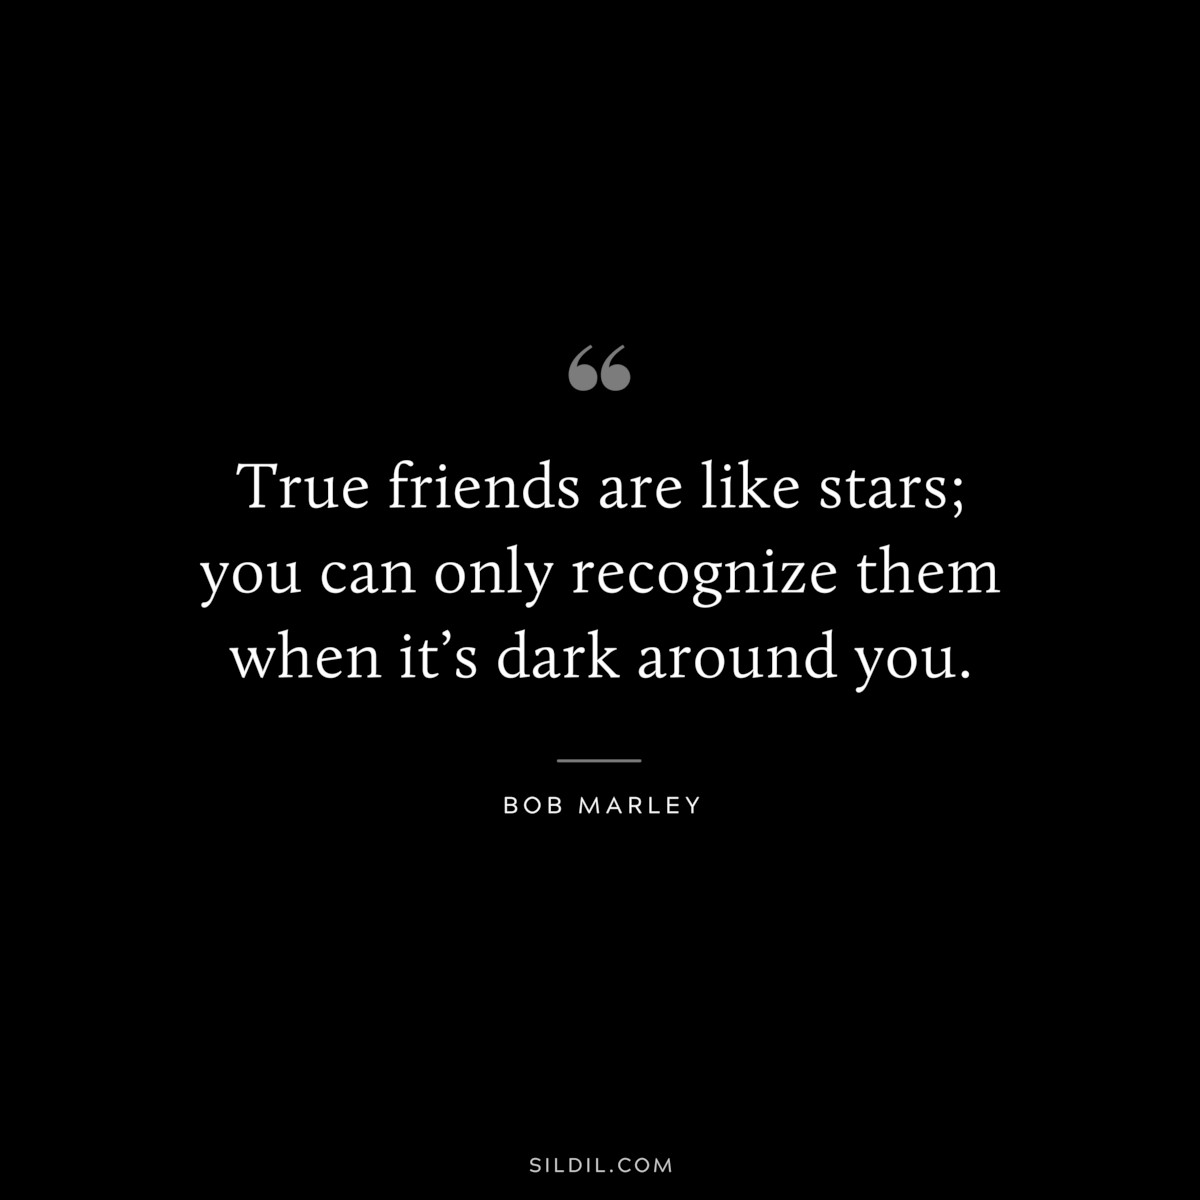 True friends are like stars; you can only recognize them when it’s dark around you. ― Bob Marley